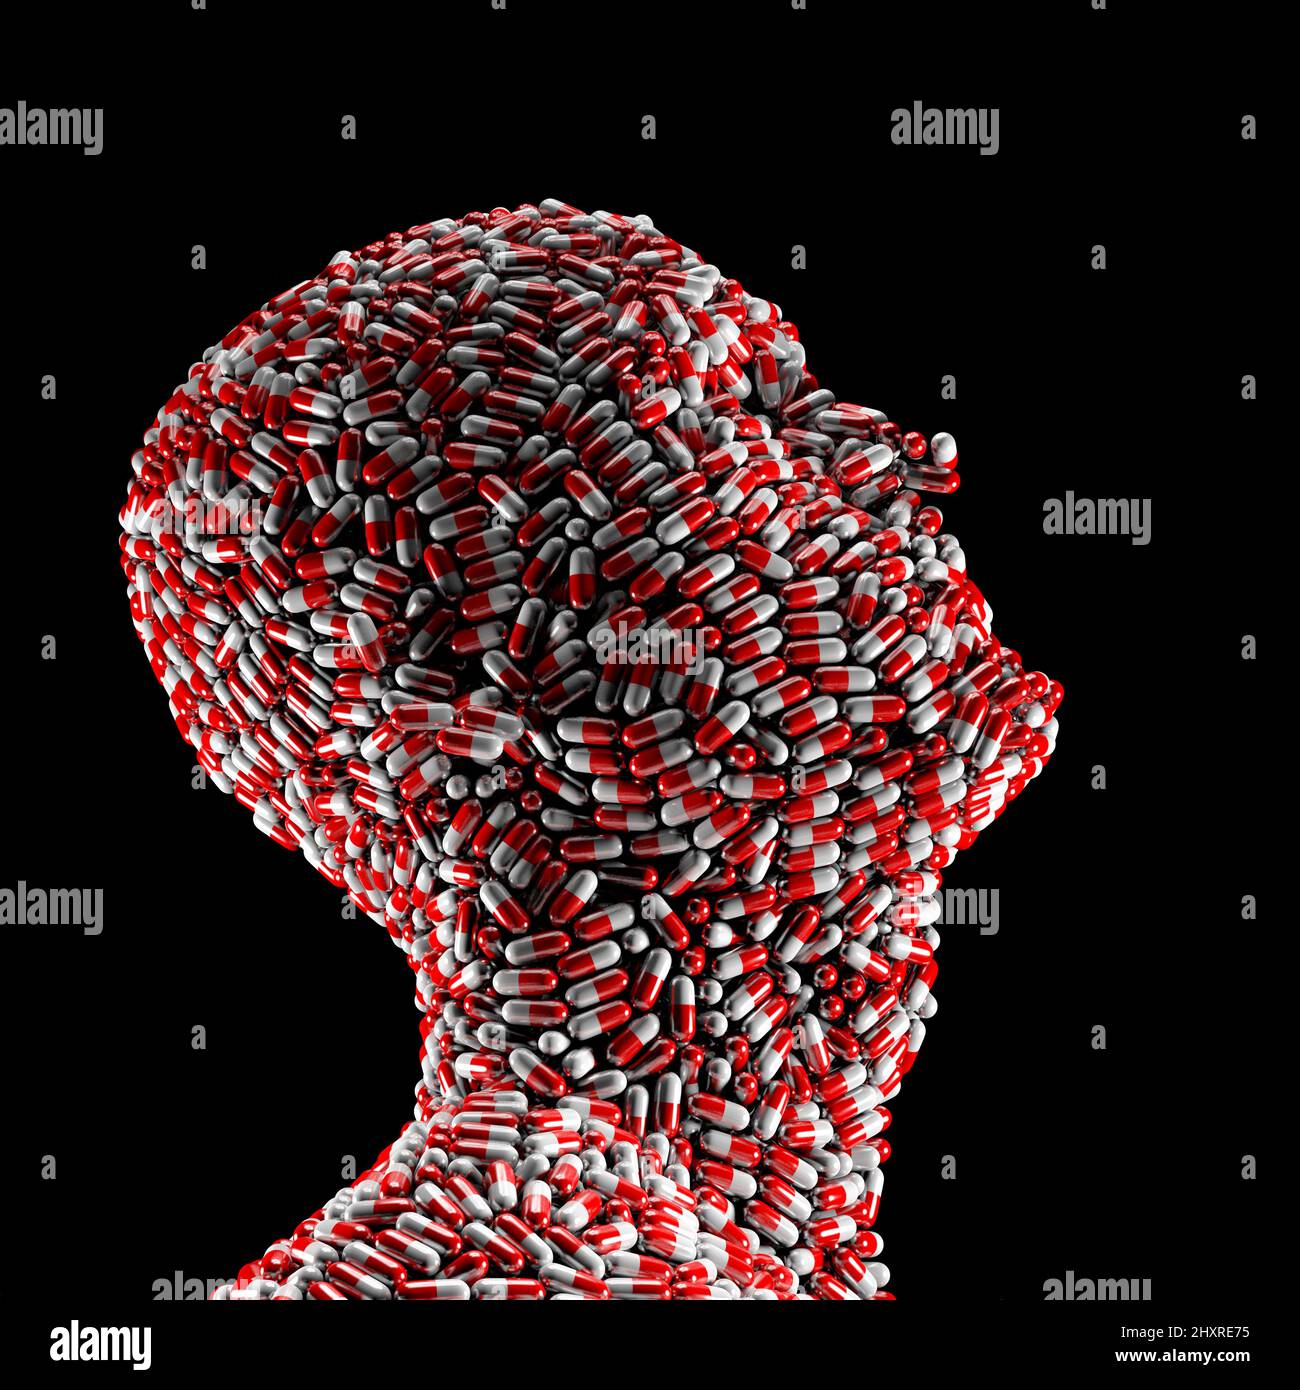 Medical capsule head metaphor - 3D illustration of medicine capsules forming male human face looking up isolated on black Stock Photo